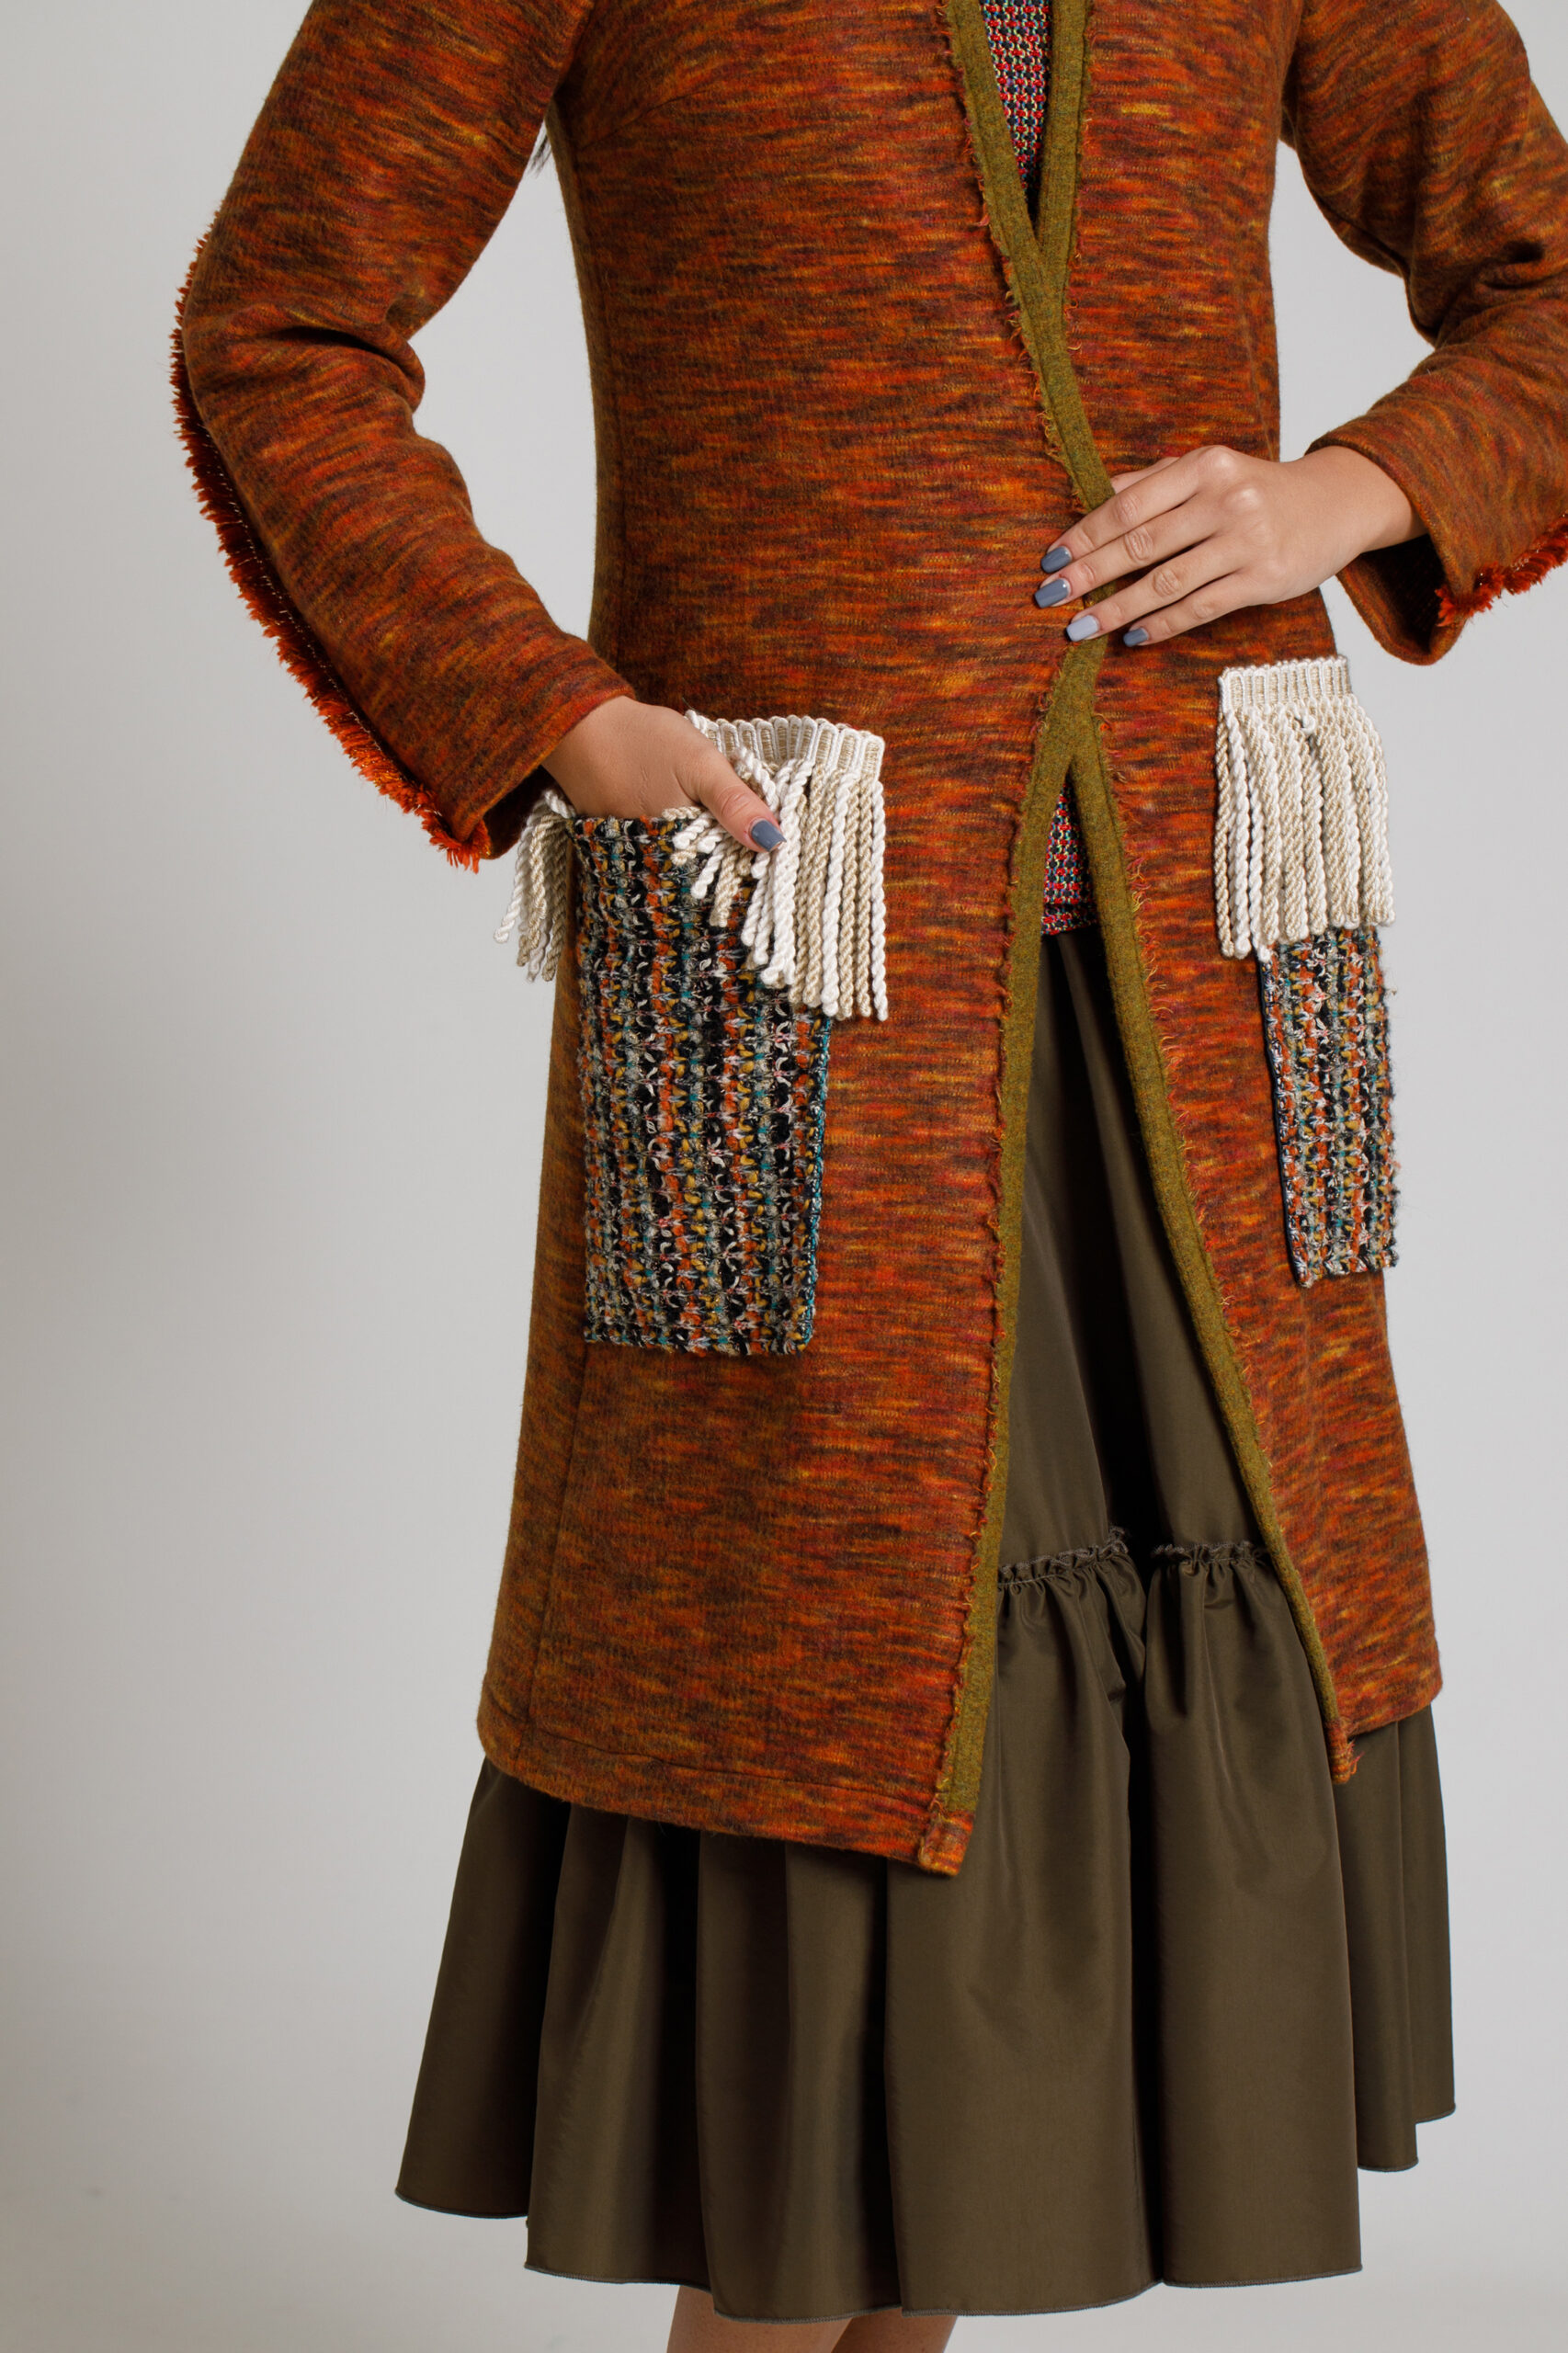 KAREN cardigan in copper knit with pockets and fringes. Natural fabrics, original design, handmade embroidery